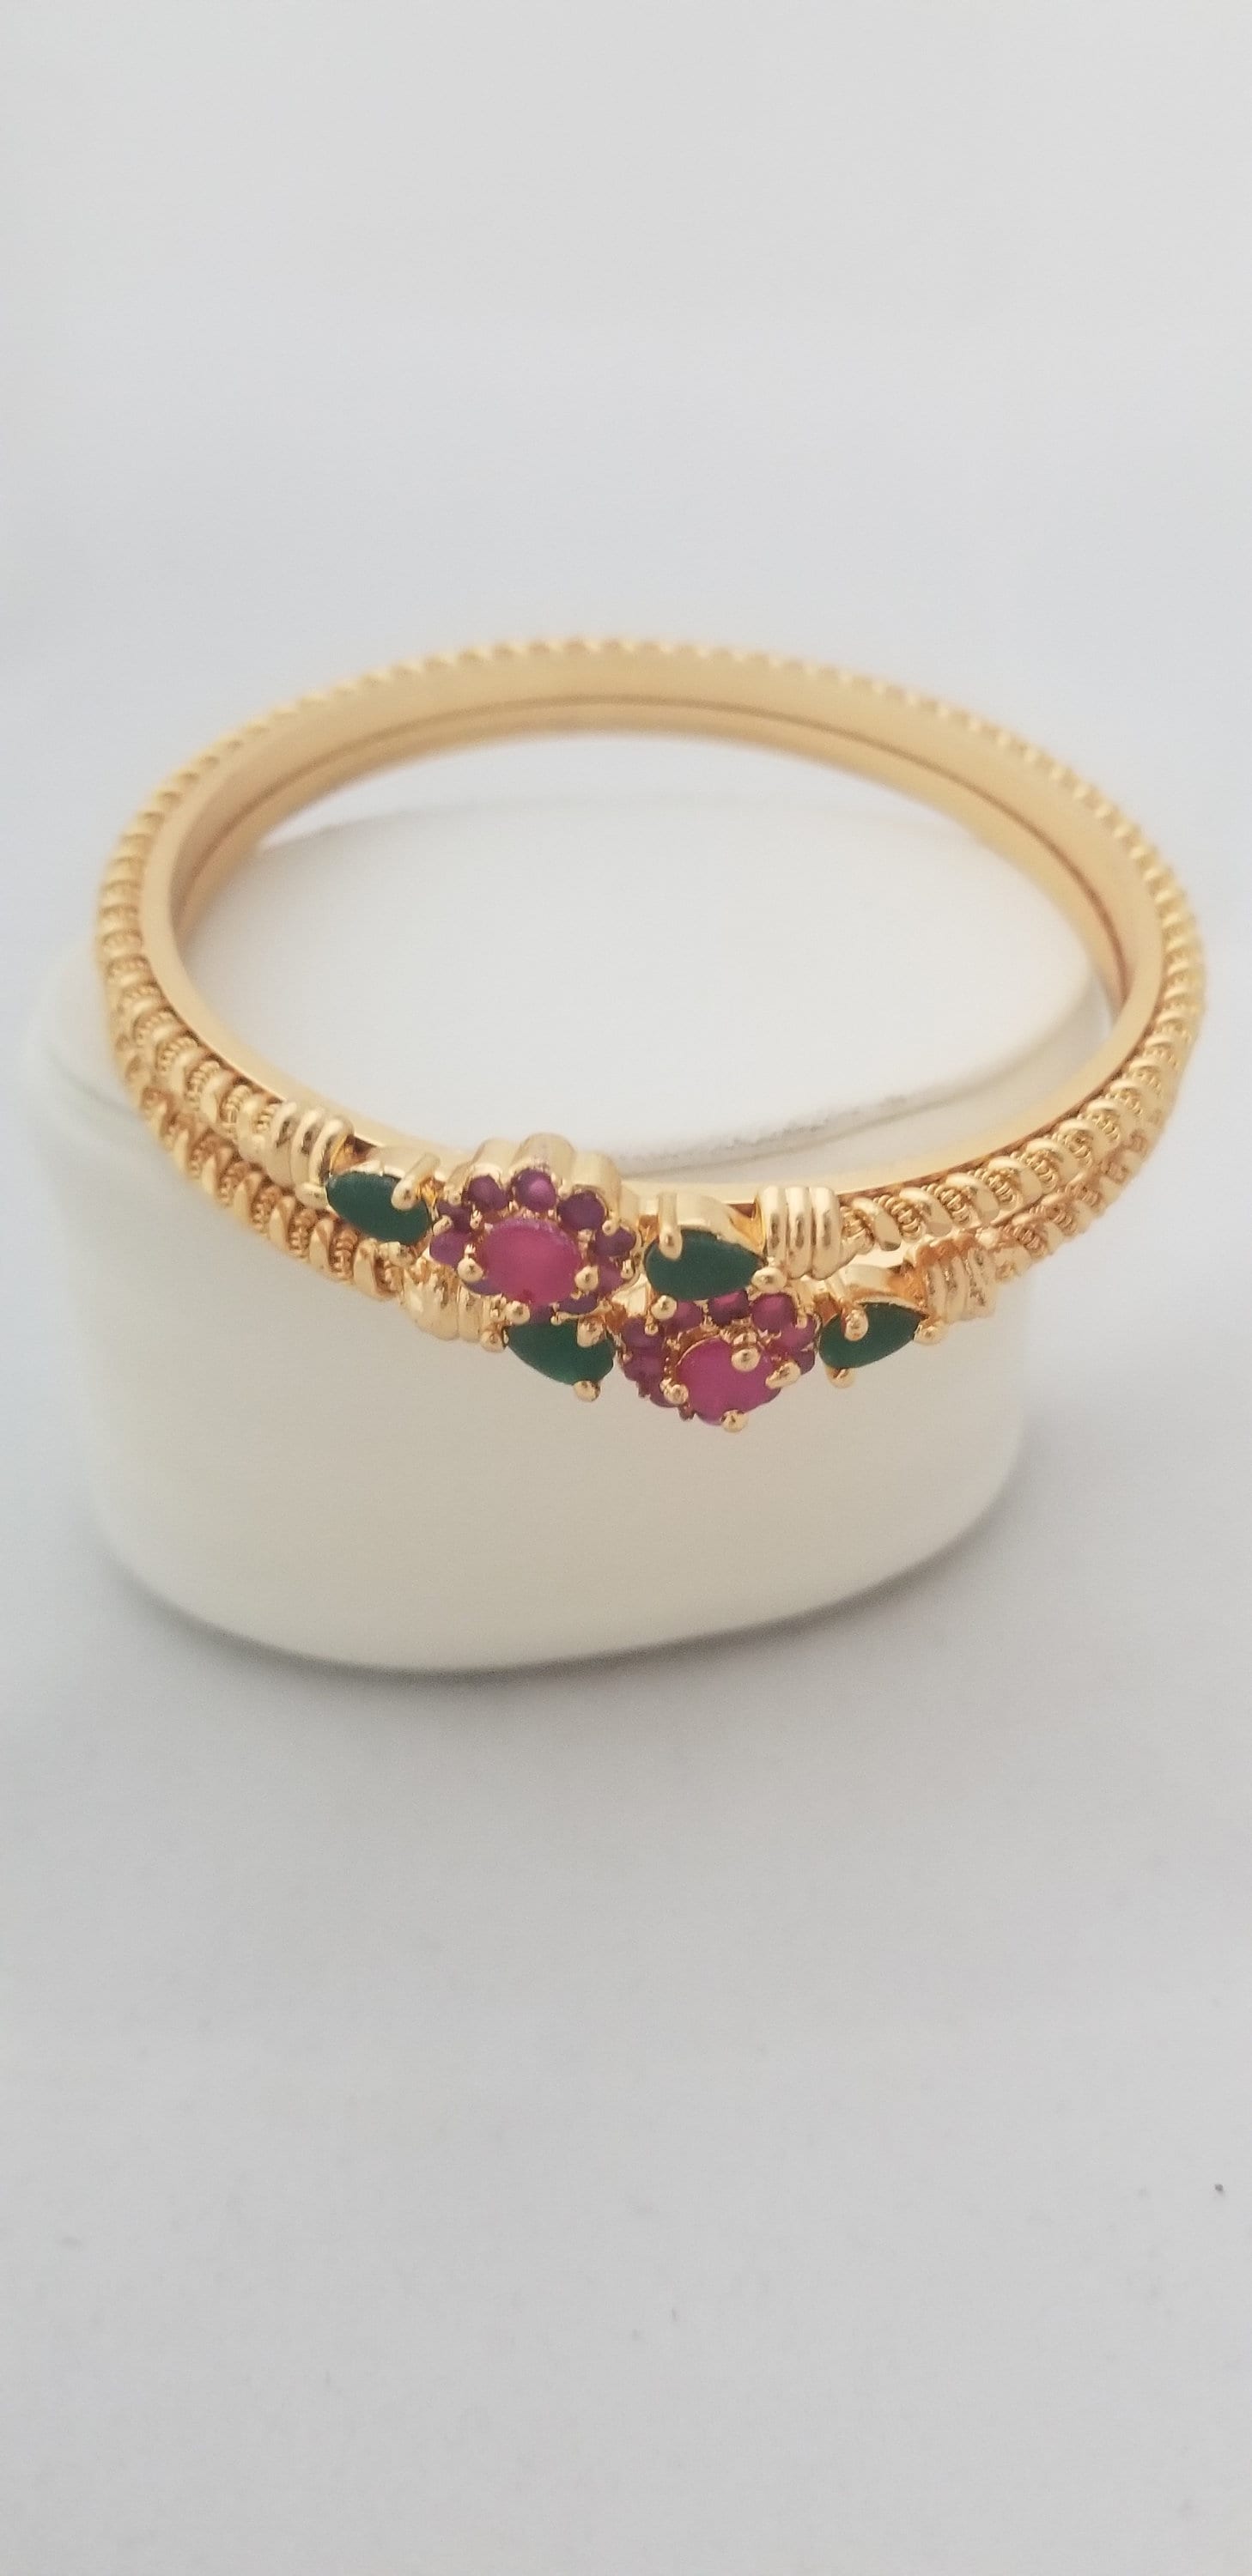 Gold finish with Multi-color stone Bangles - Set of 2 Bangles - Size 2.6